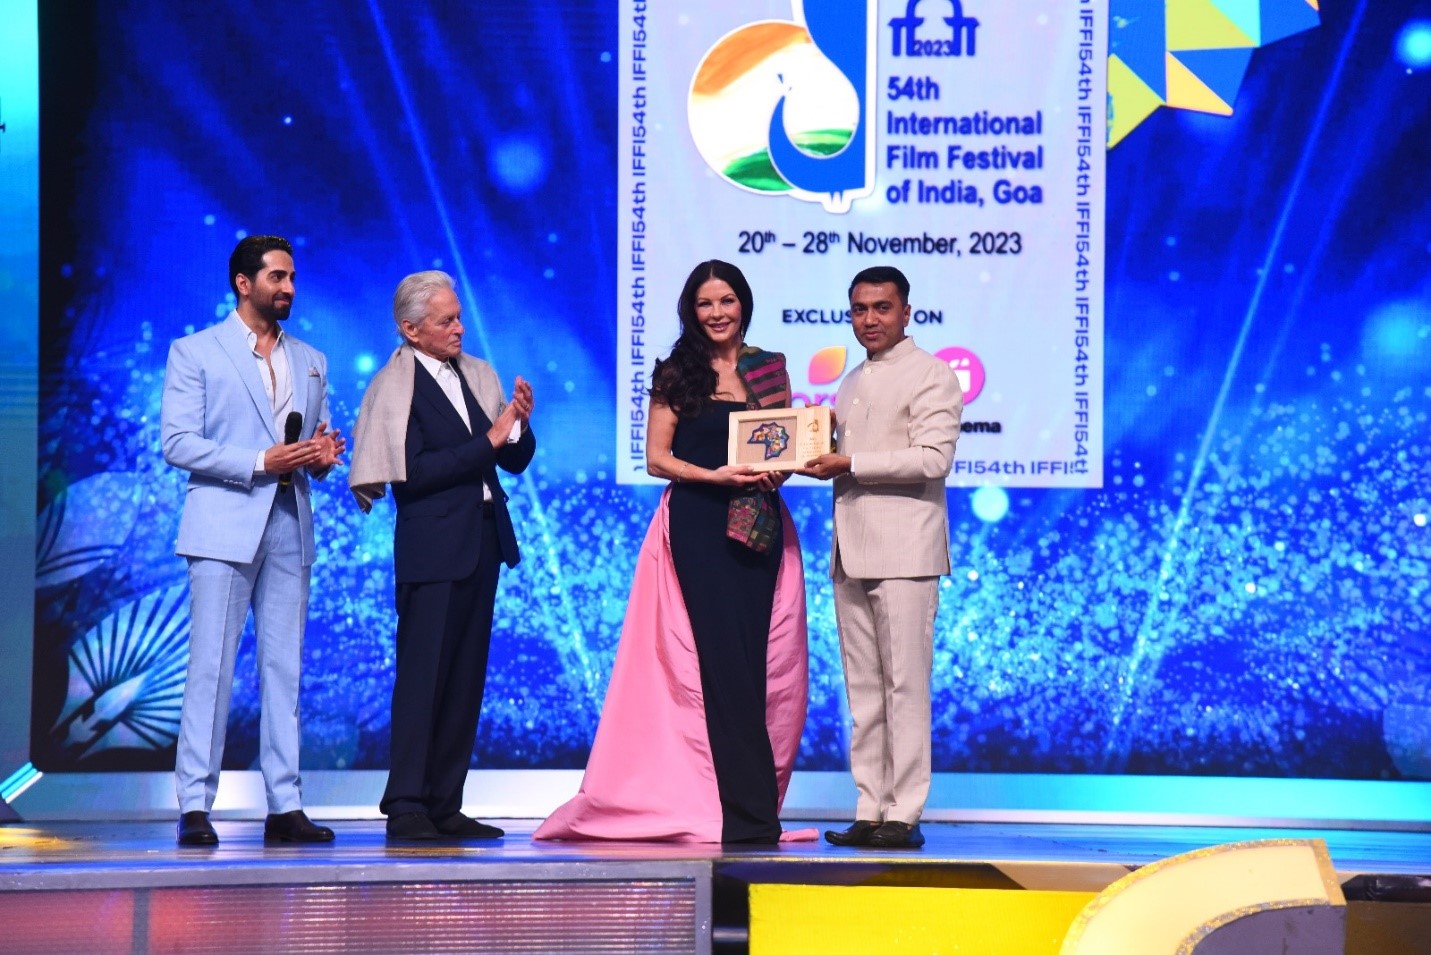 IFFI 2023 A Grand Finale with Awards and Celebrations Marking the Festival's Closure